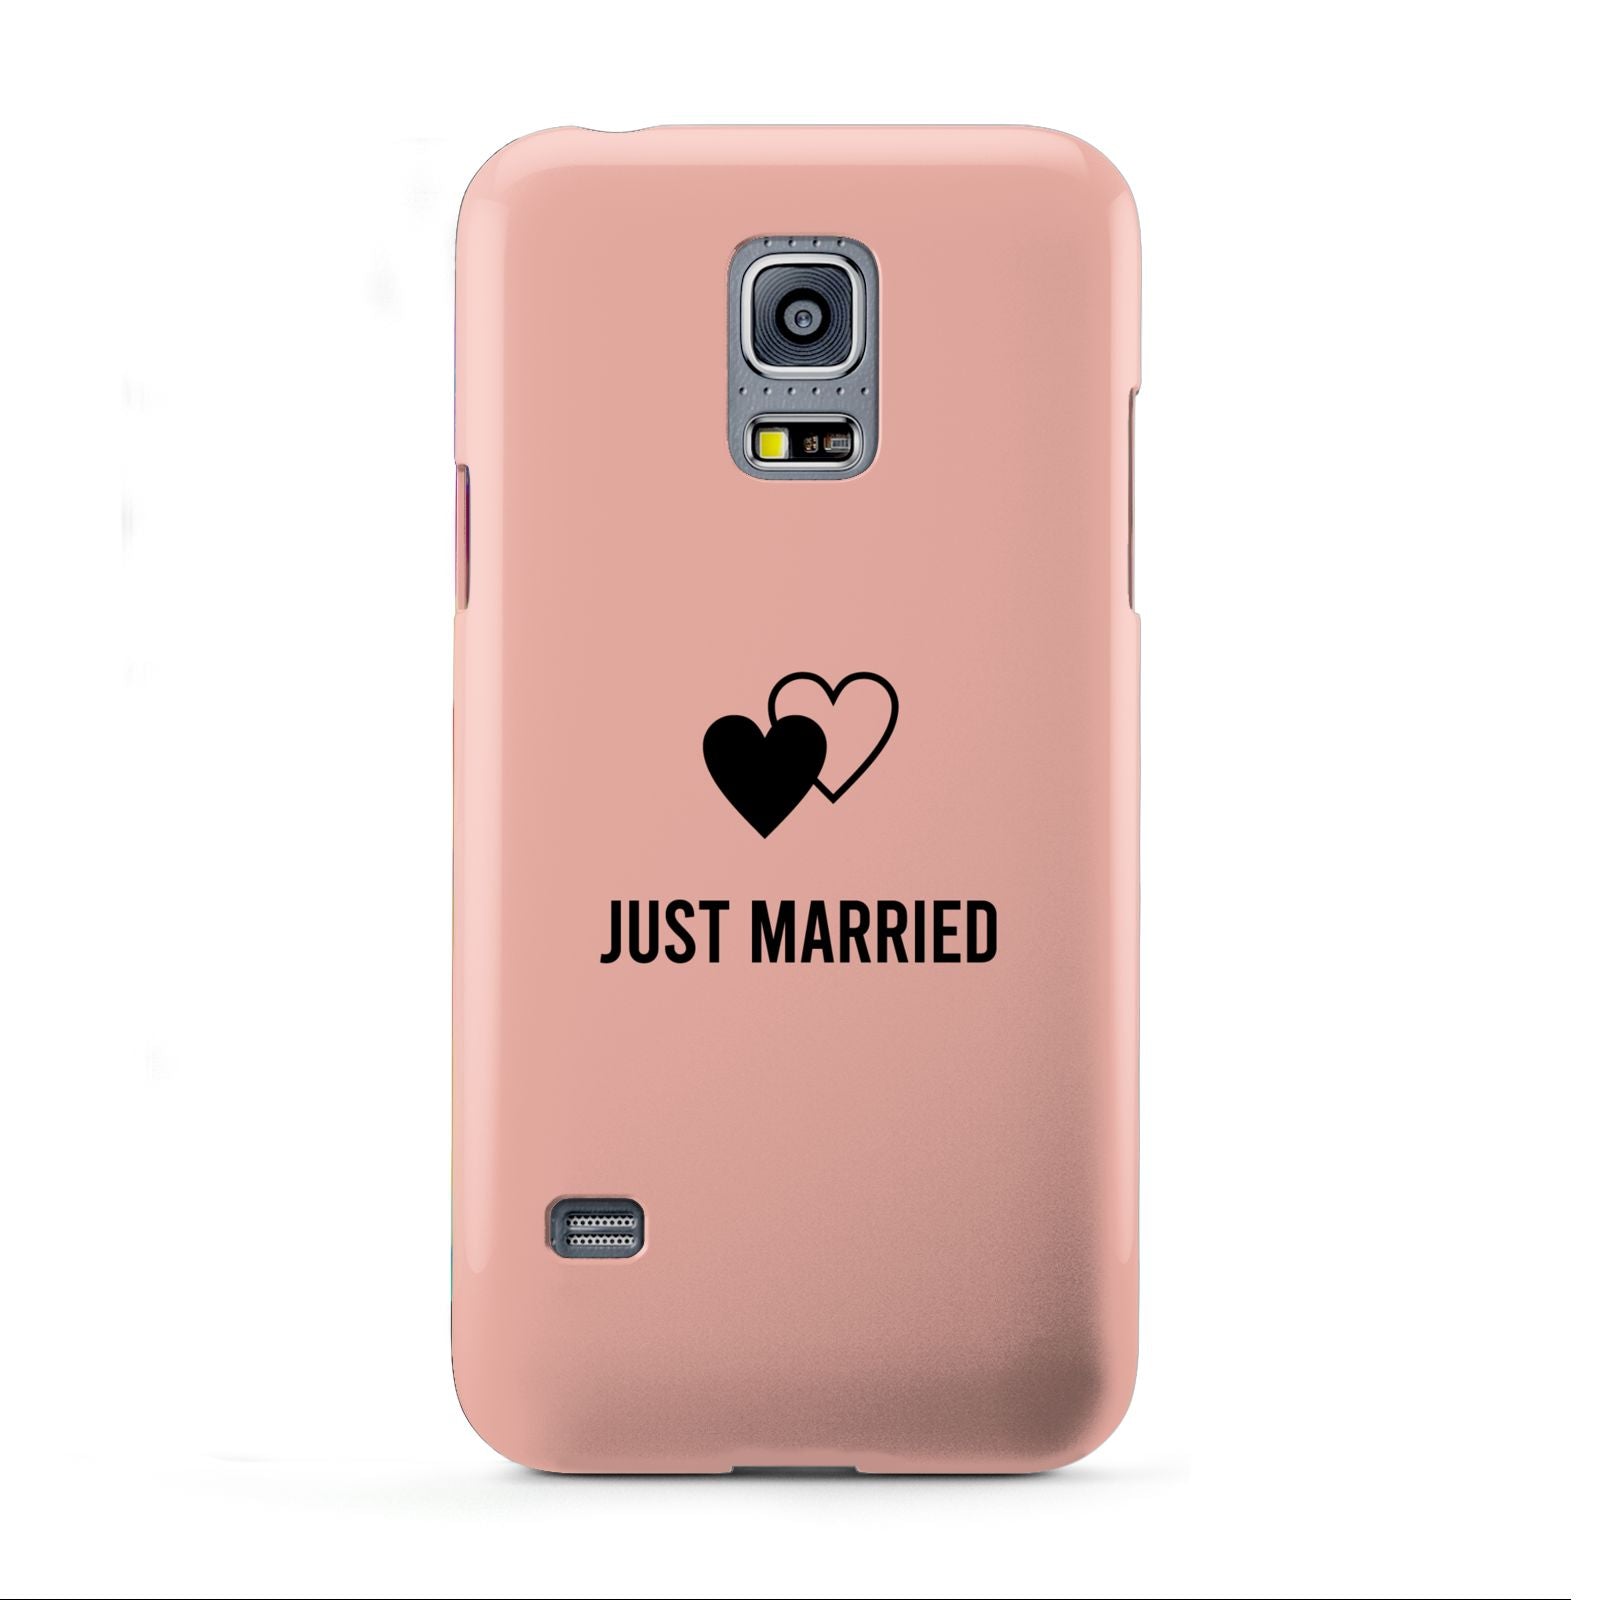 Just Married Samsung Galaxy S5 Mini Case